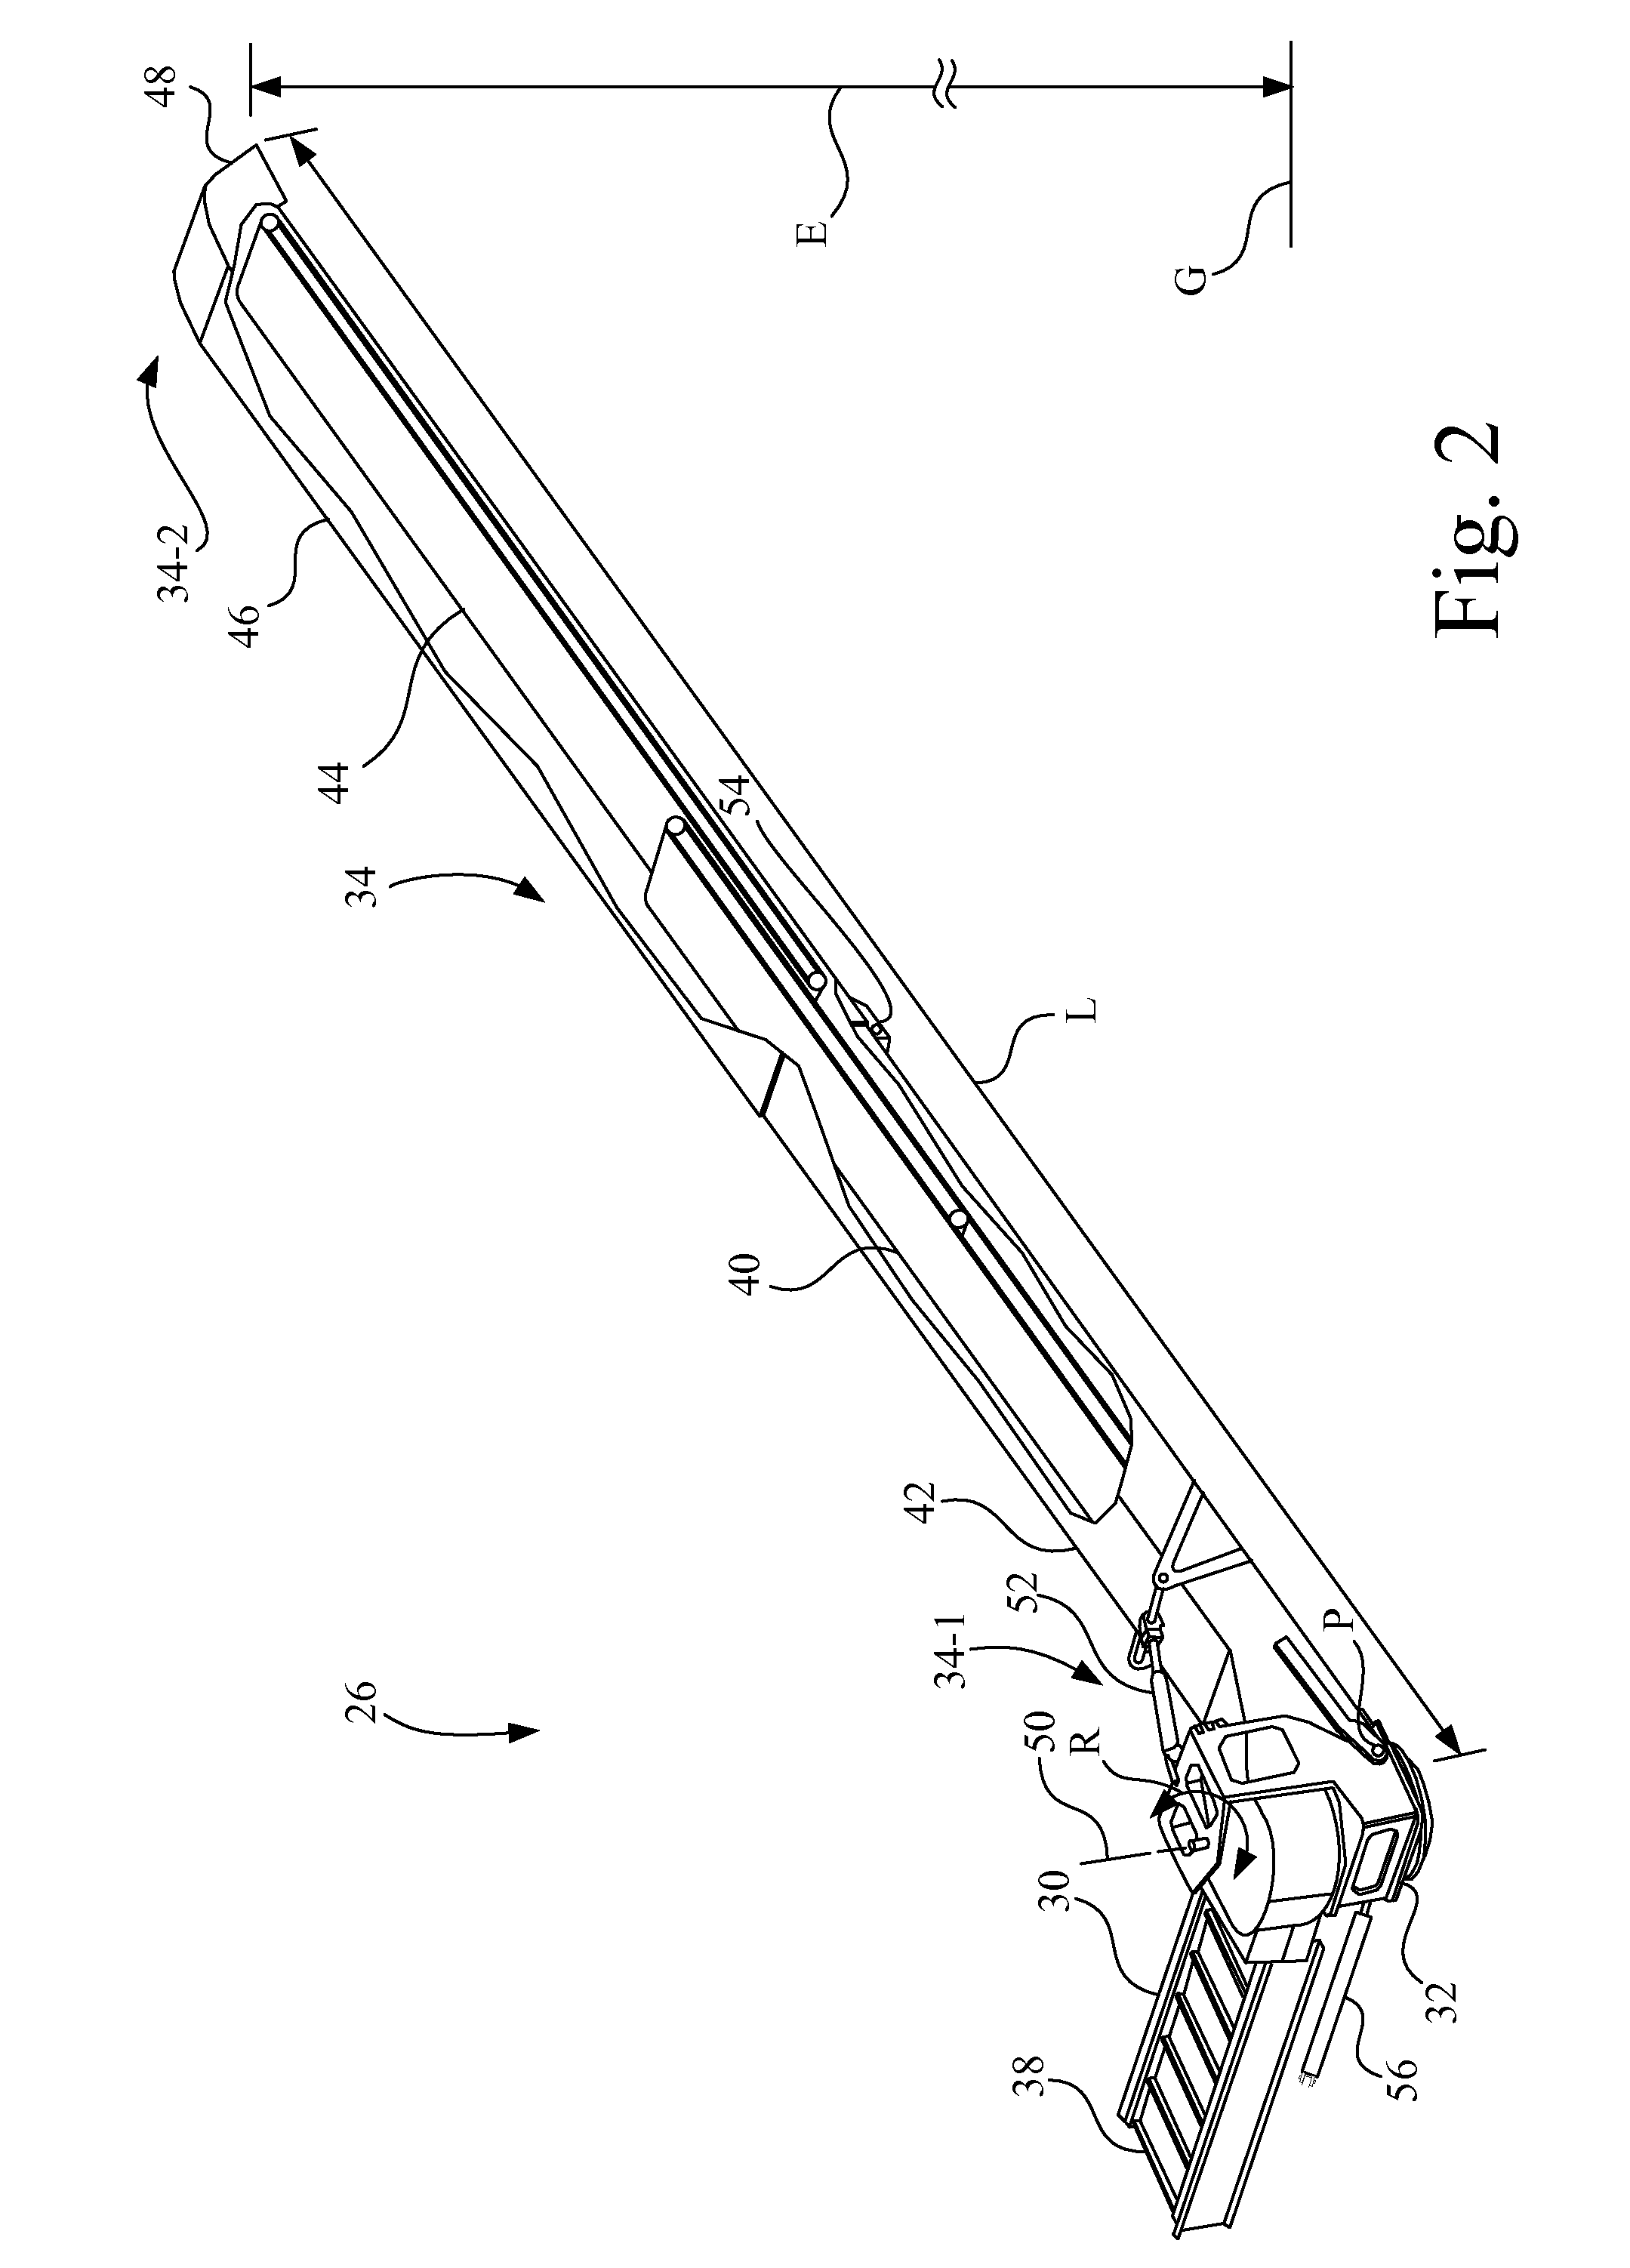 Agricultural work machine having an unloading system for unloading an agricultural product